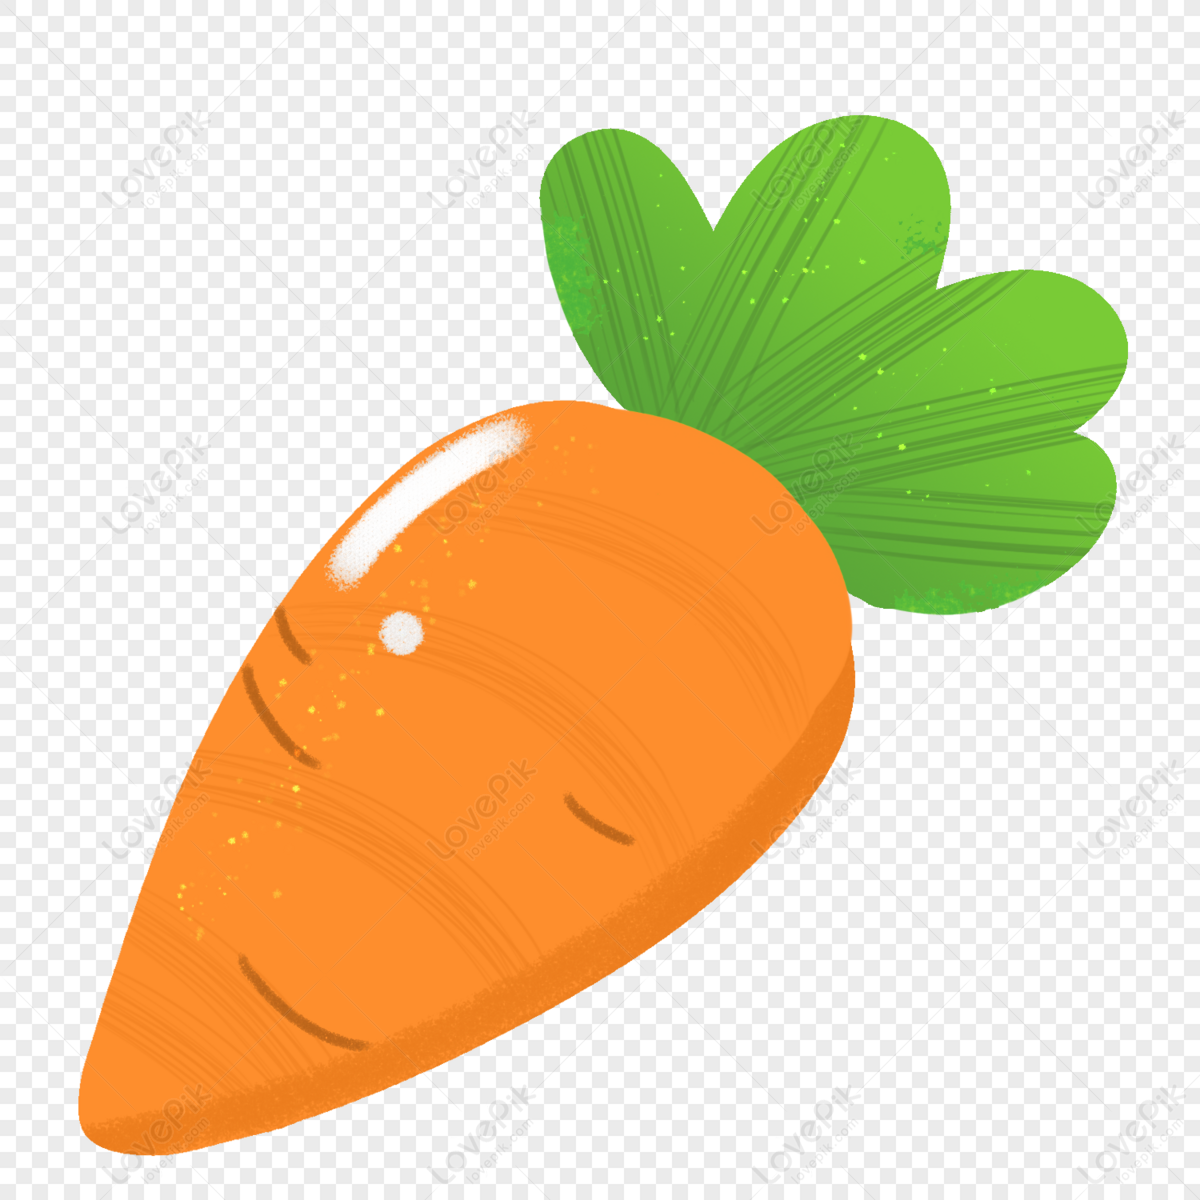 Cartoon Carrot Material PNG Transparent And Clipart Image For Free Download  - Lovepik | 400250456